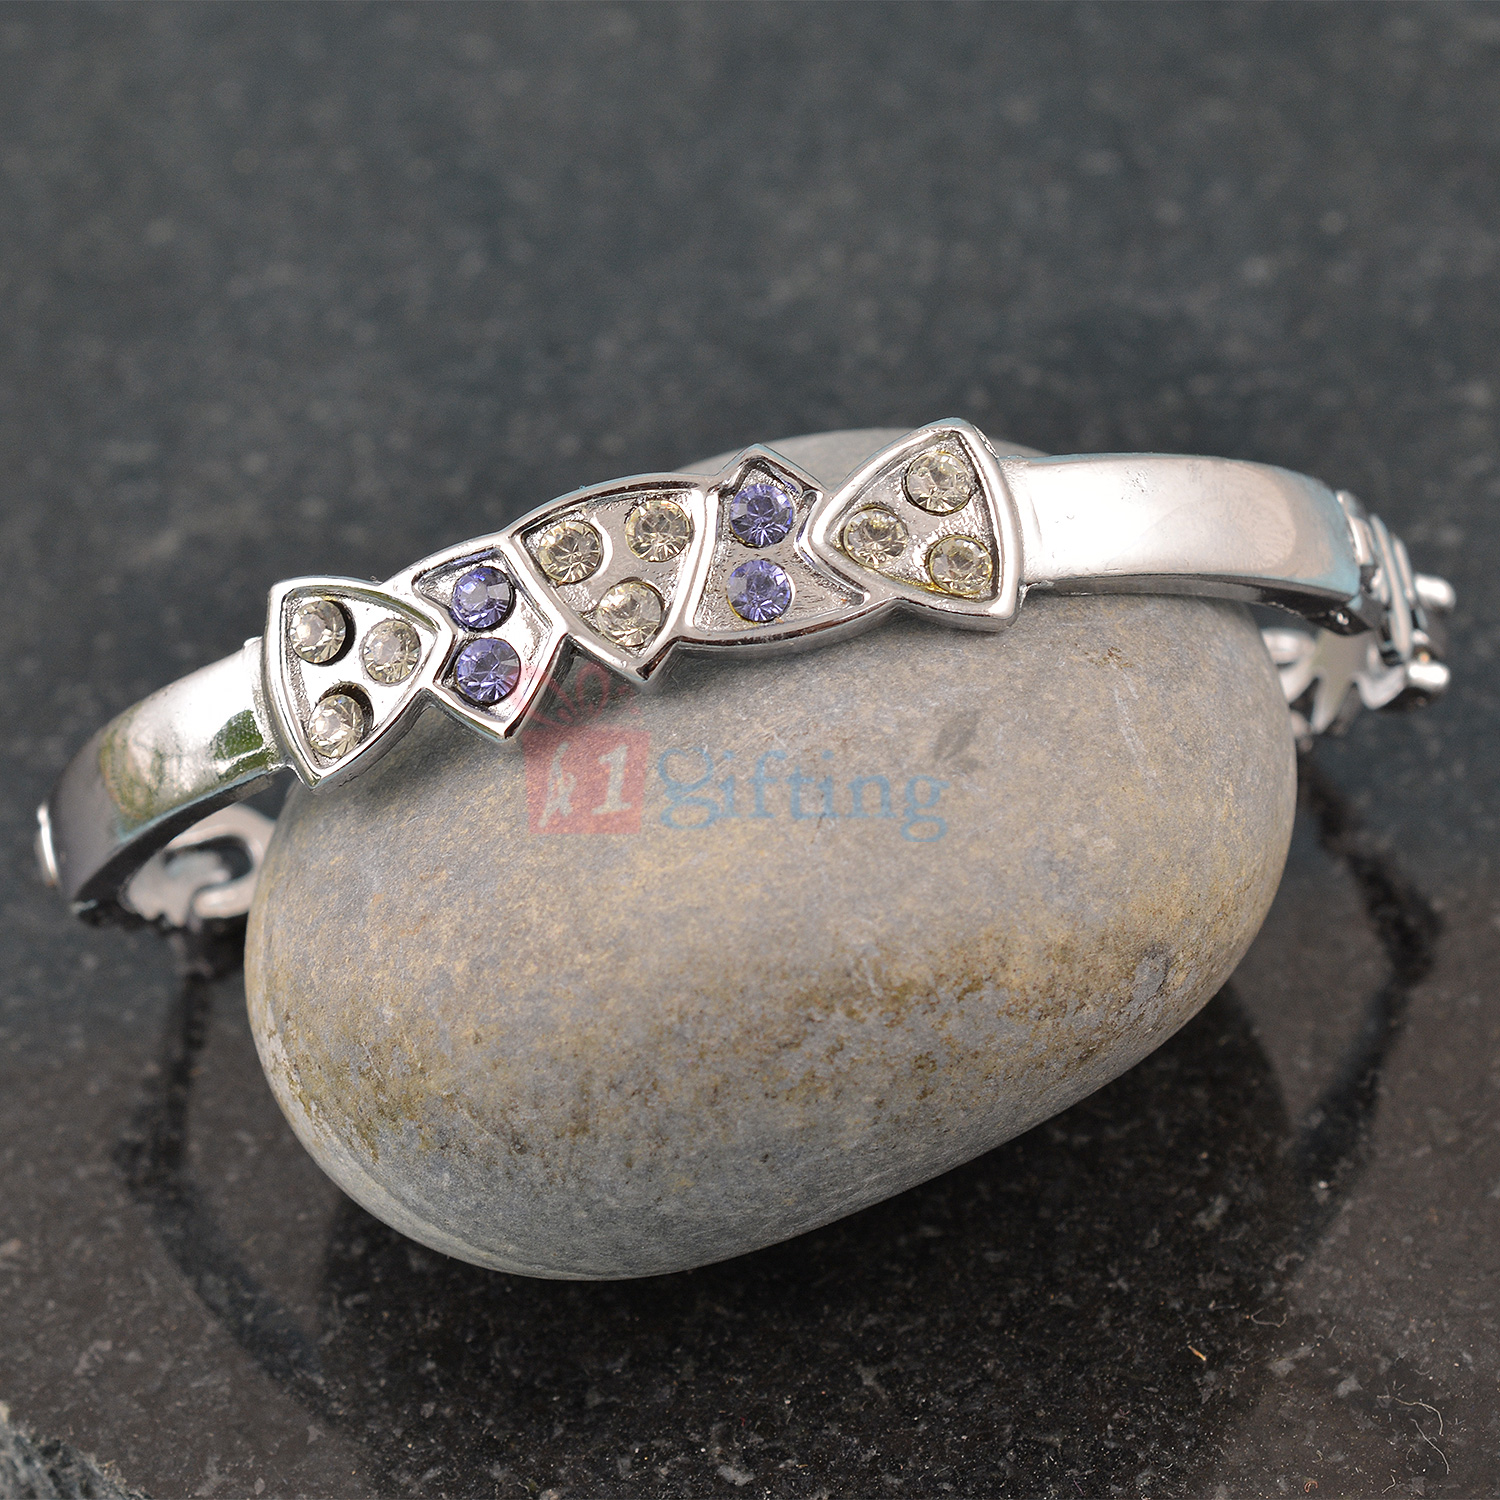 Silver Plated Charming Ethnic Look Bracelet